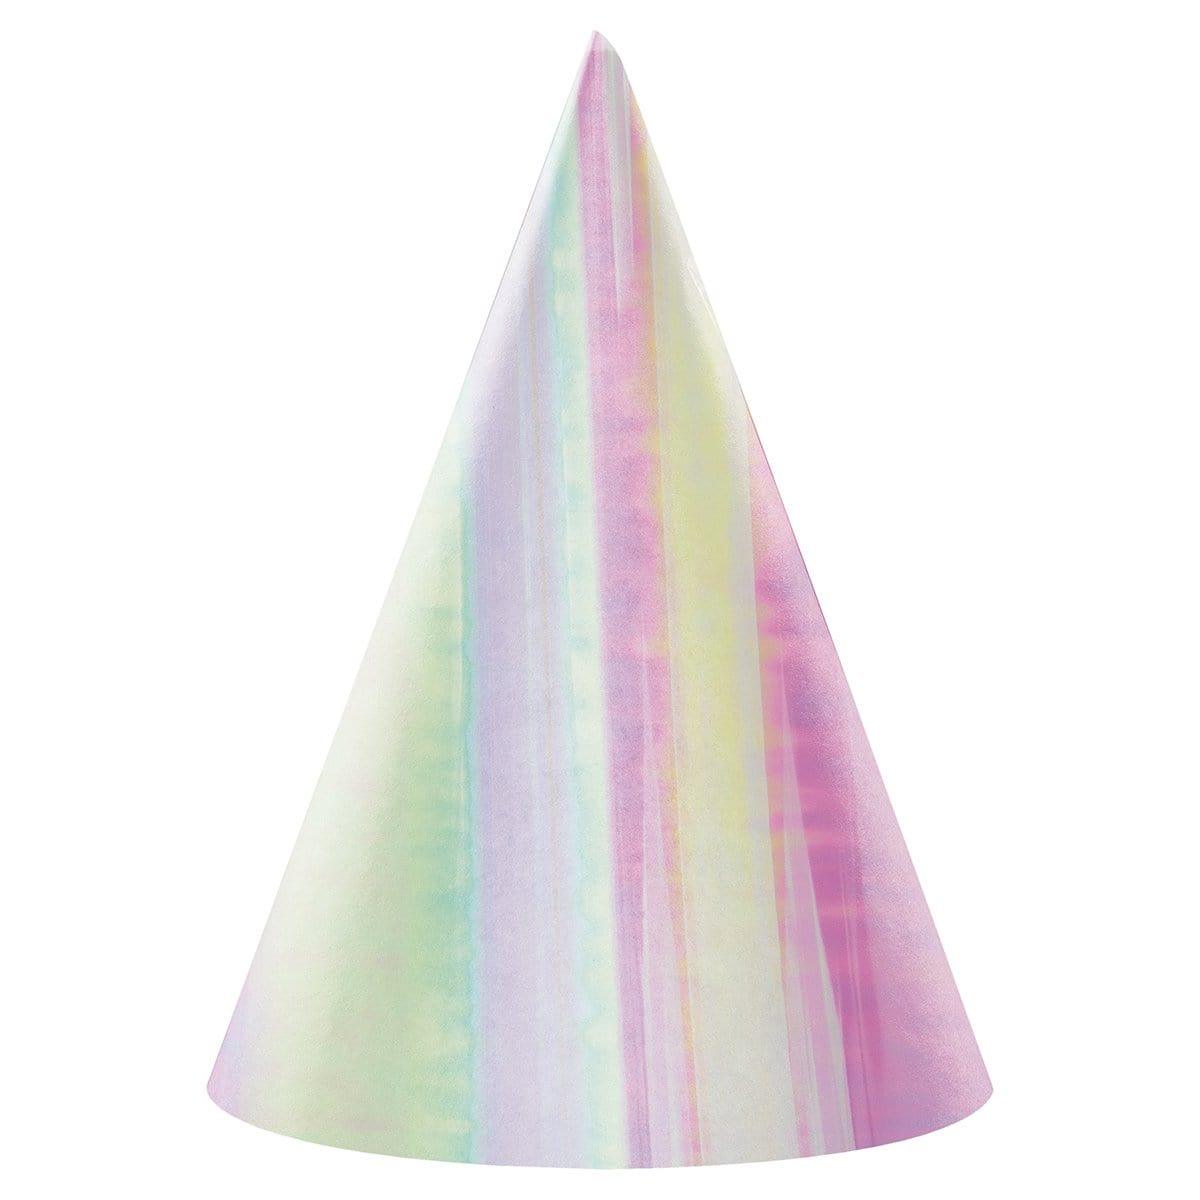 Buy Everyday Entertaining Iridescent Party Hats, 8 Per Package sold at Party Expert